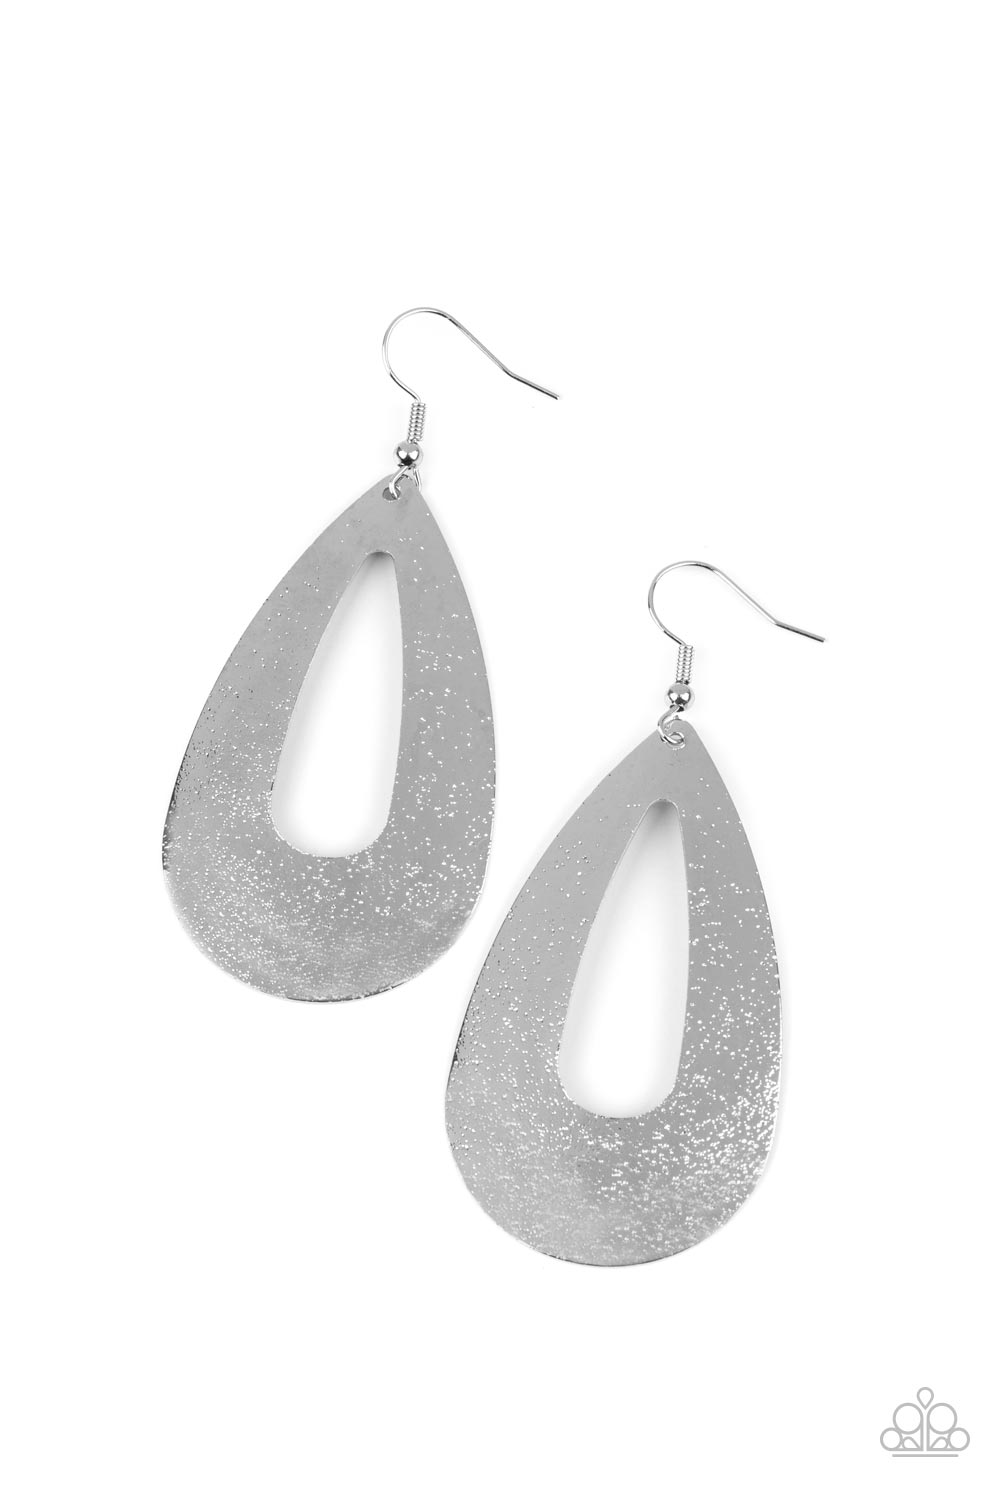 Delicately hammered in endless silver shimmer, a flat glistening oval silhouette swings from the ear for a beautiful basic look. Earring attaches to a standard fishhook fitting.